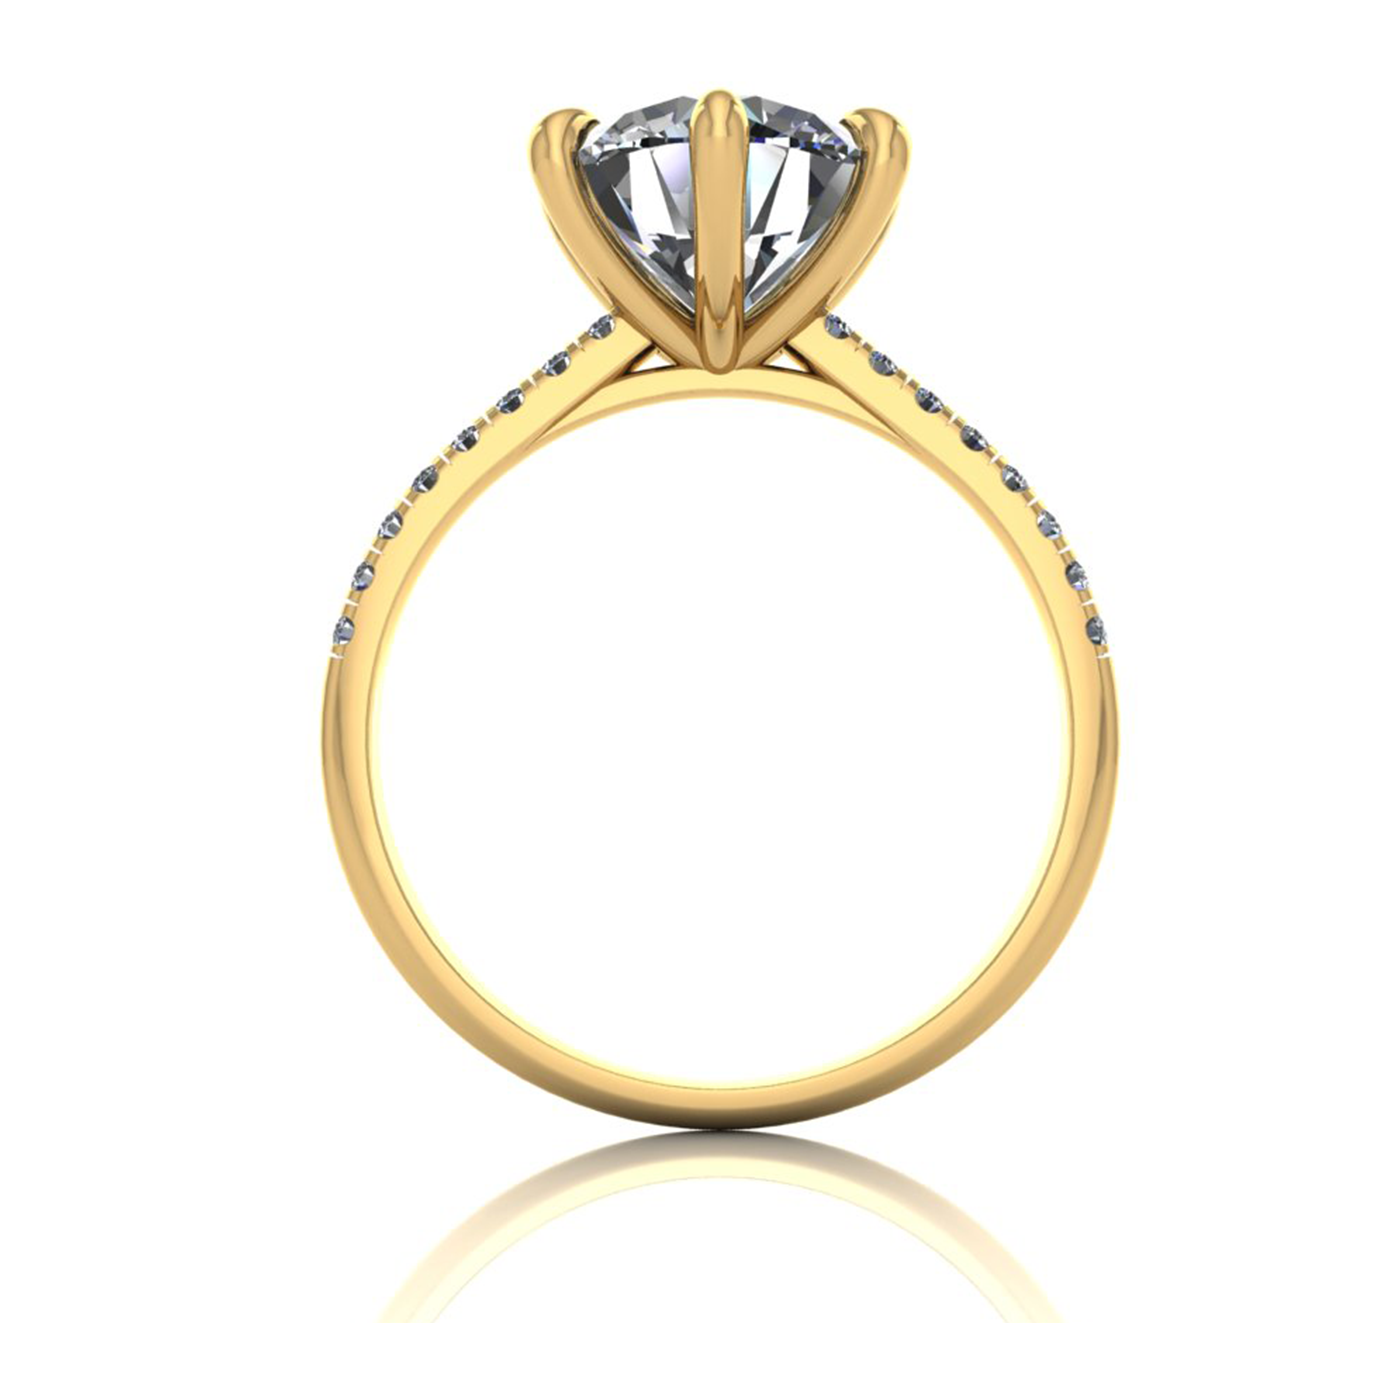 18k yellow gold 2,50 ct 6 prongs round cut diamond engagement ring with whisper thin pavÉ set band